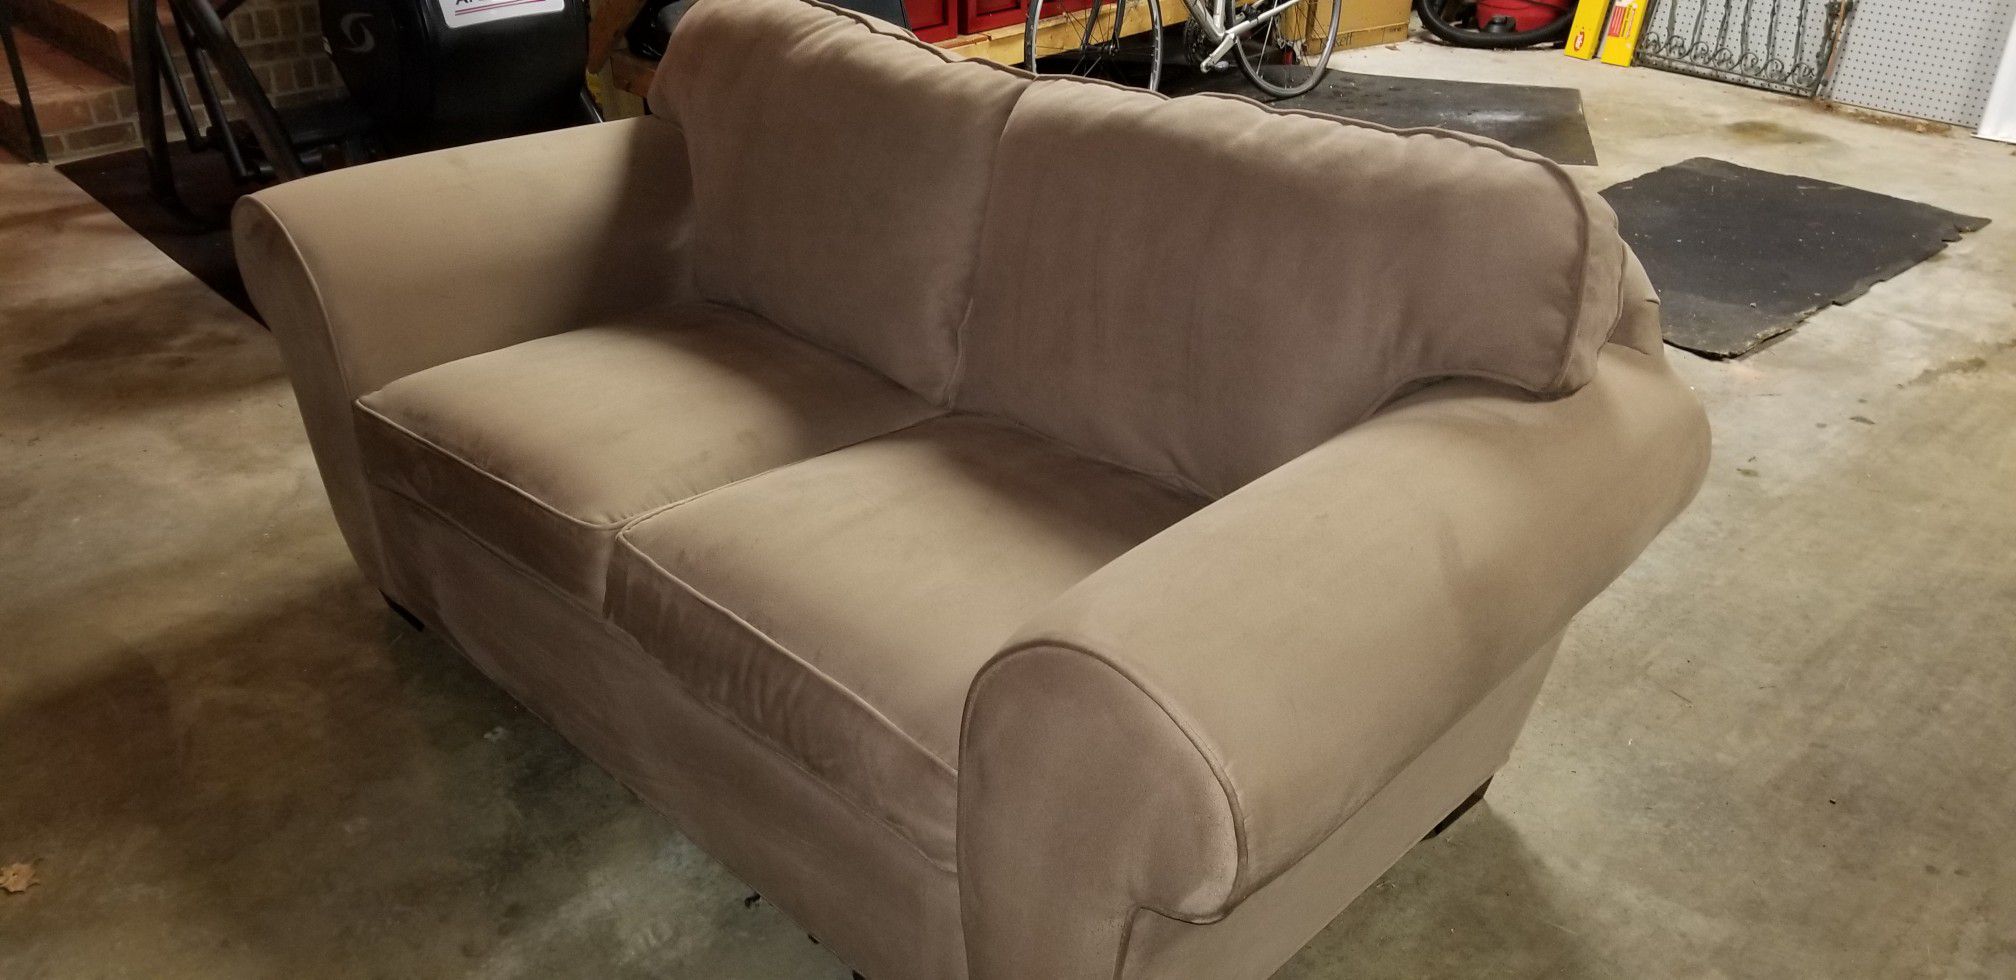 Loveseat-only $150